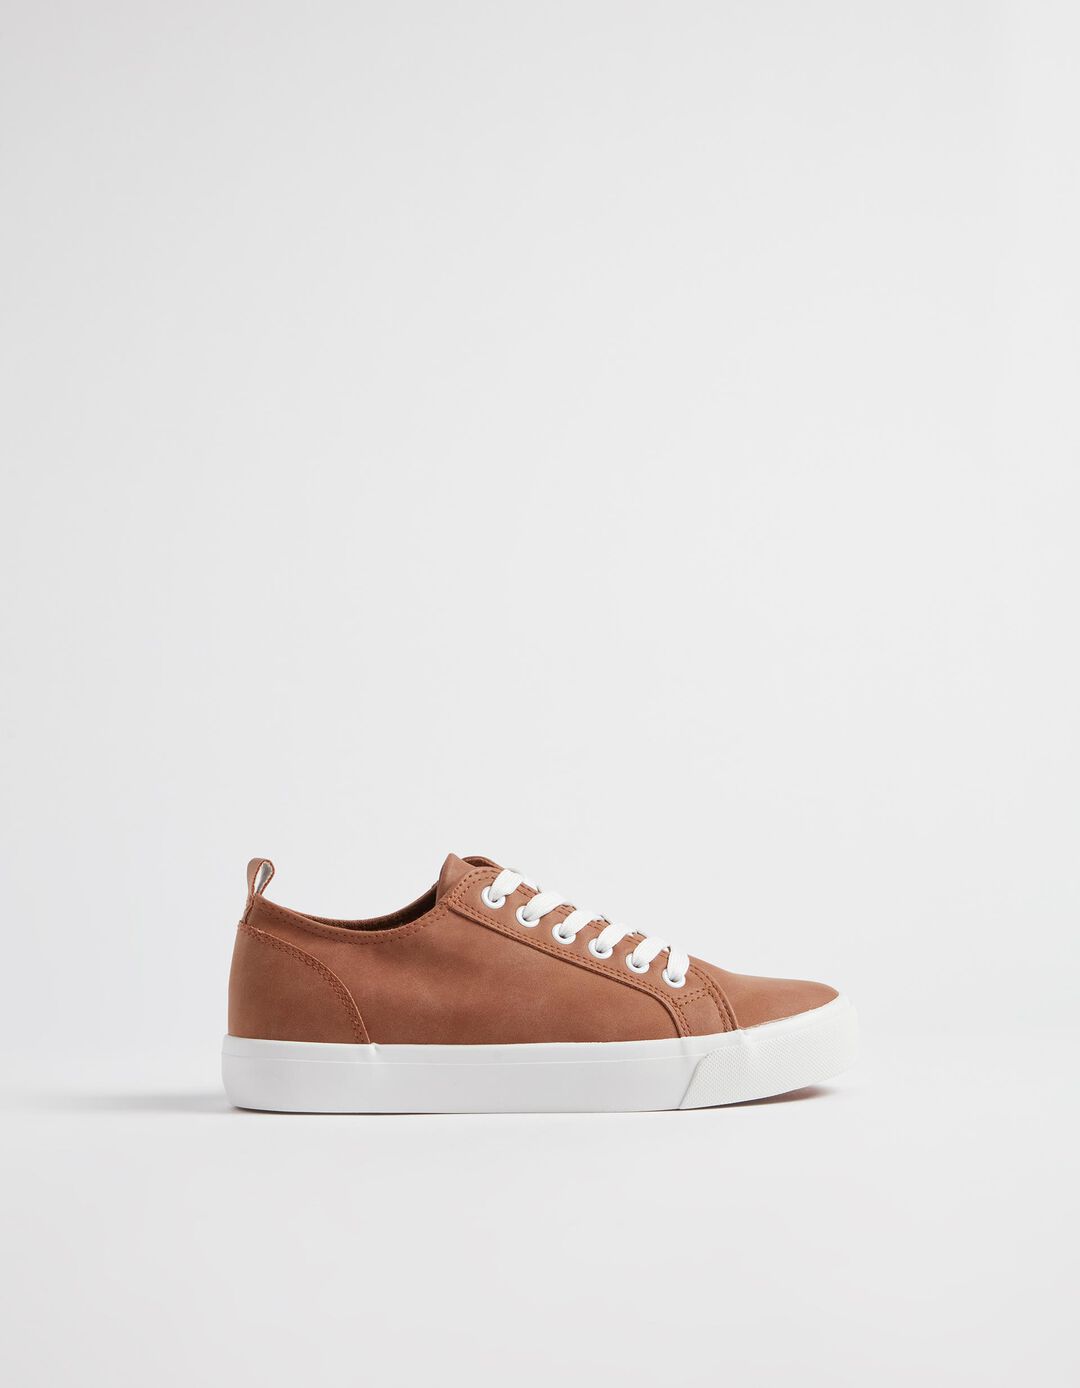 Trainers, Women, Brown